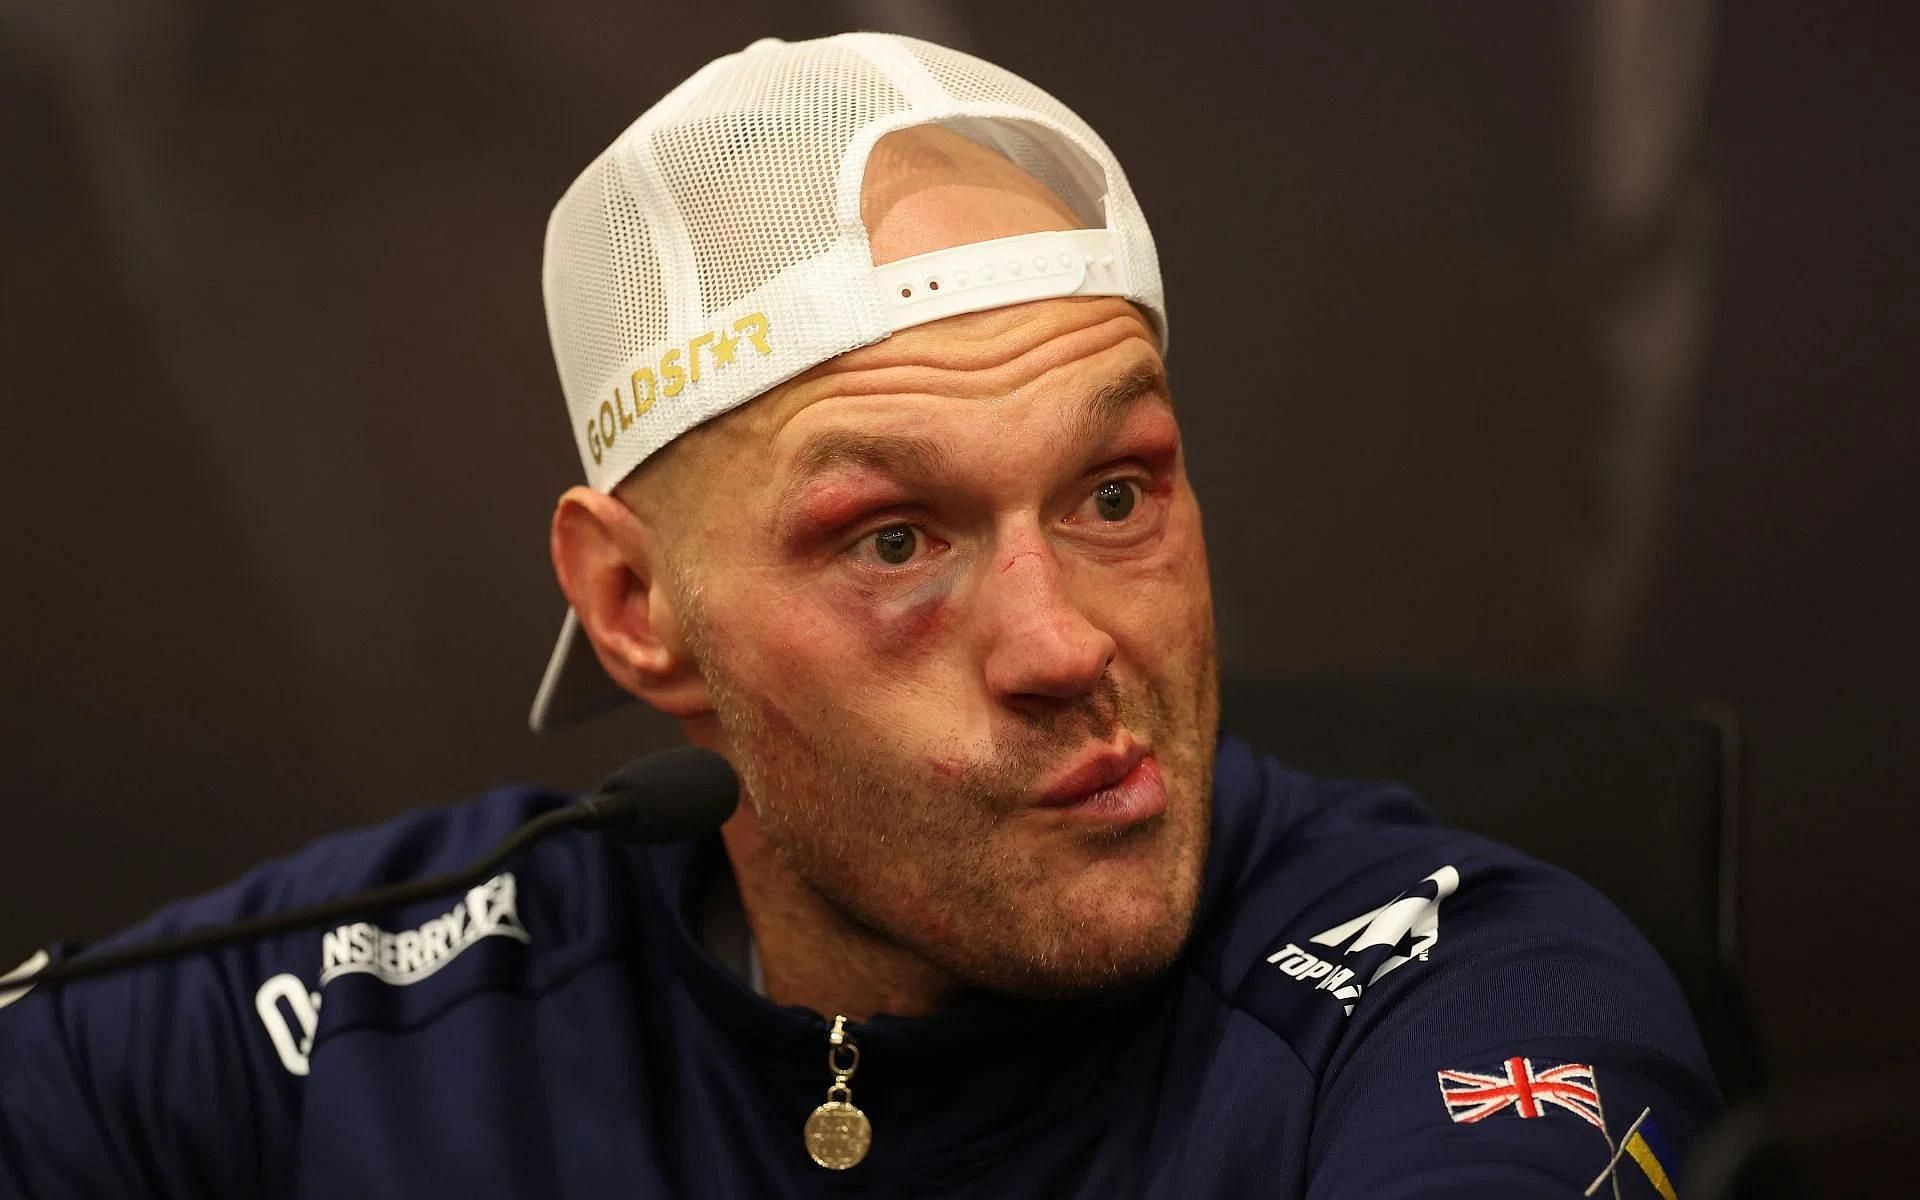 Tyson Fury reacts to the judges